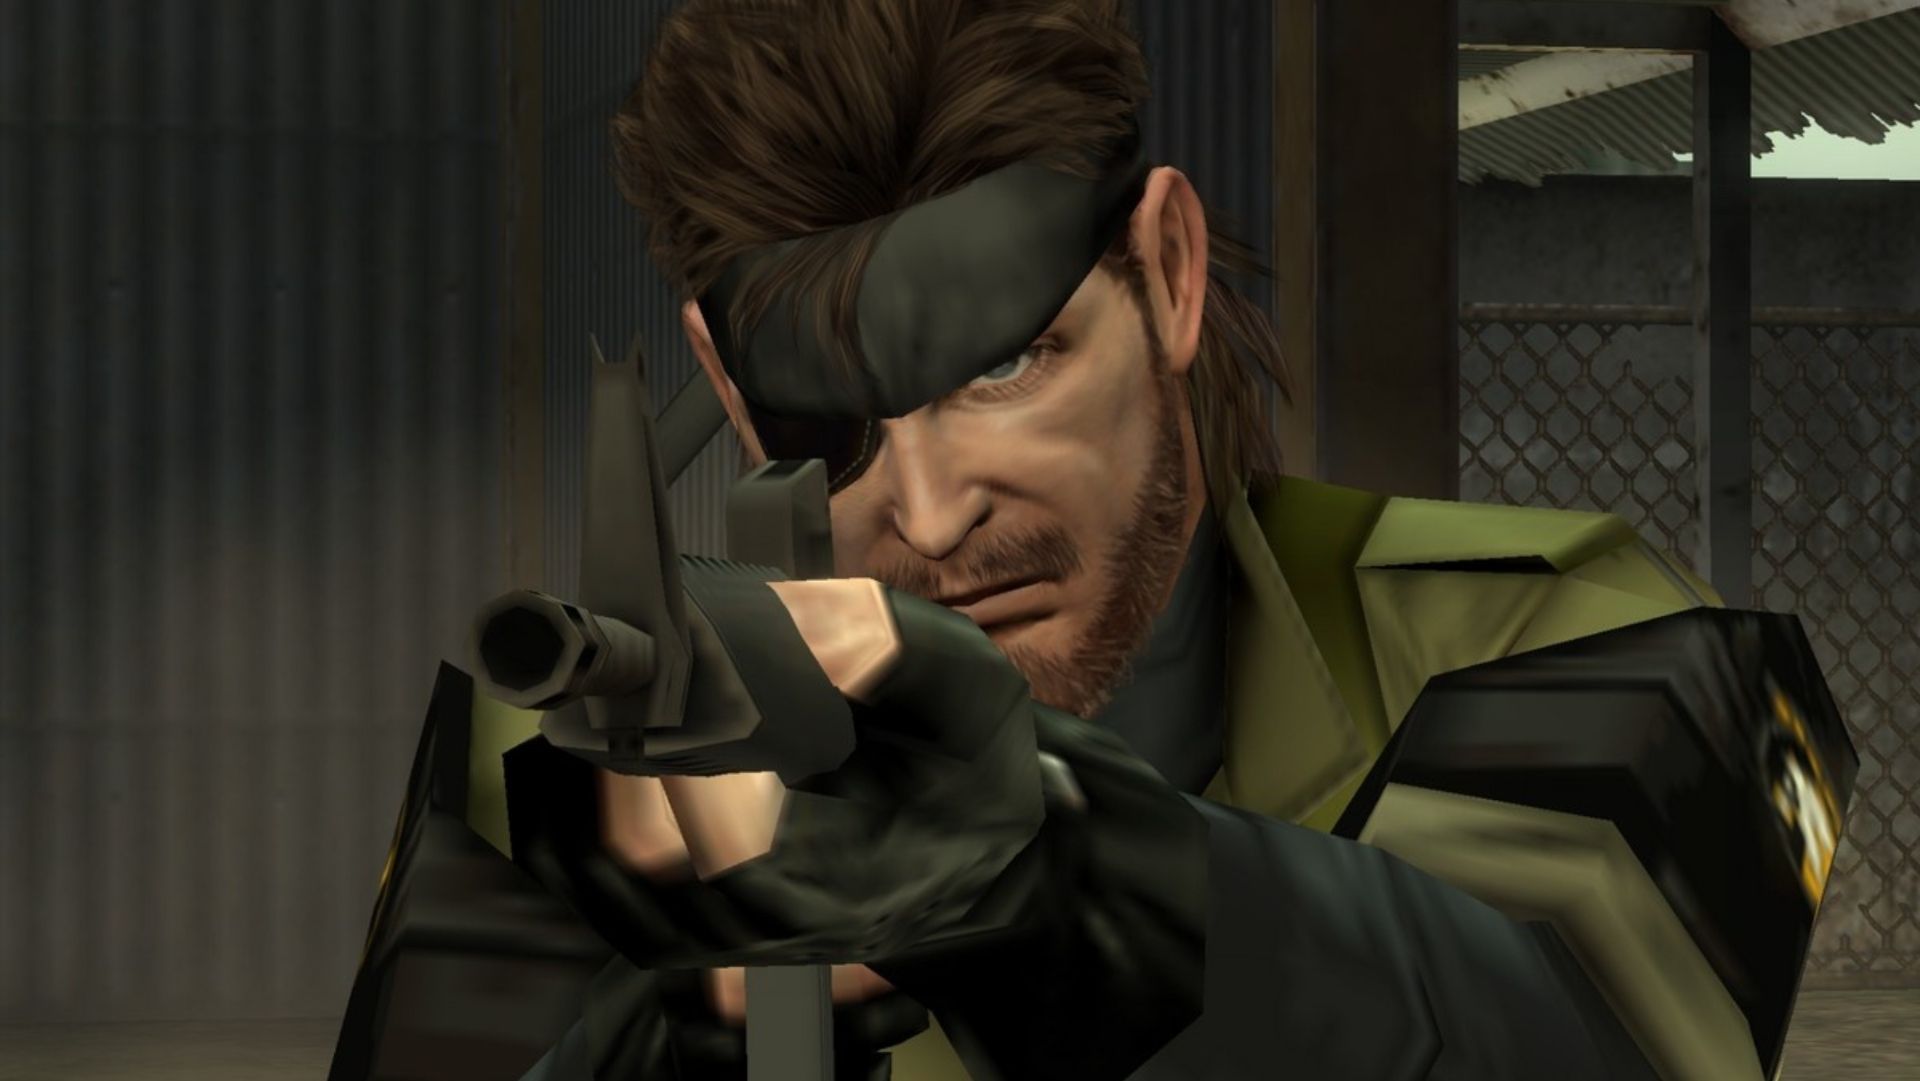 Snake aiming his rifle in Metal Gear Solid: Peace Walker.